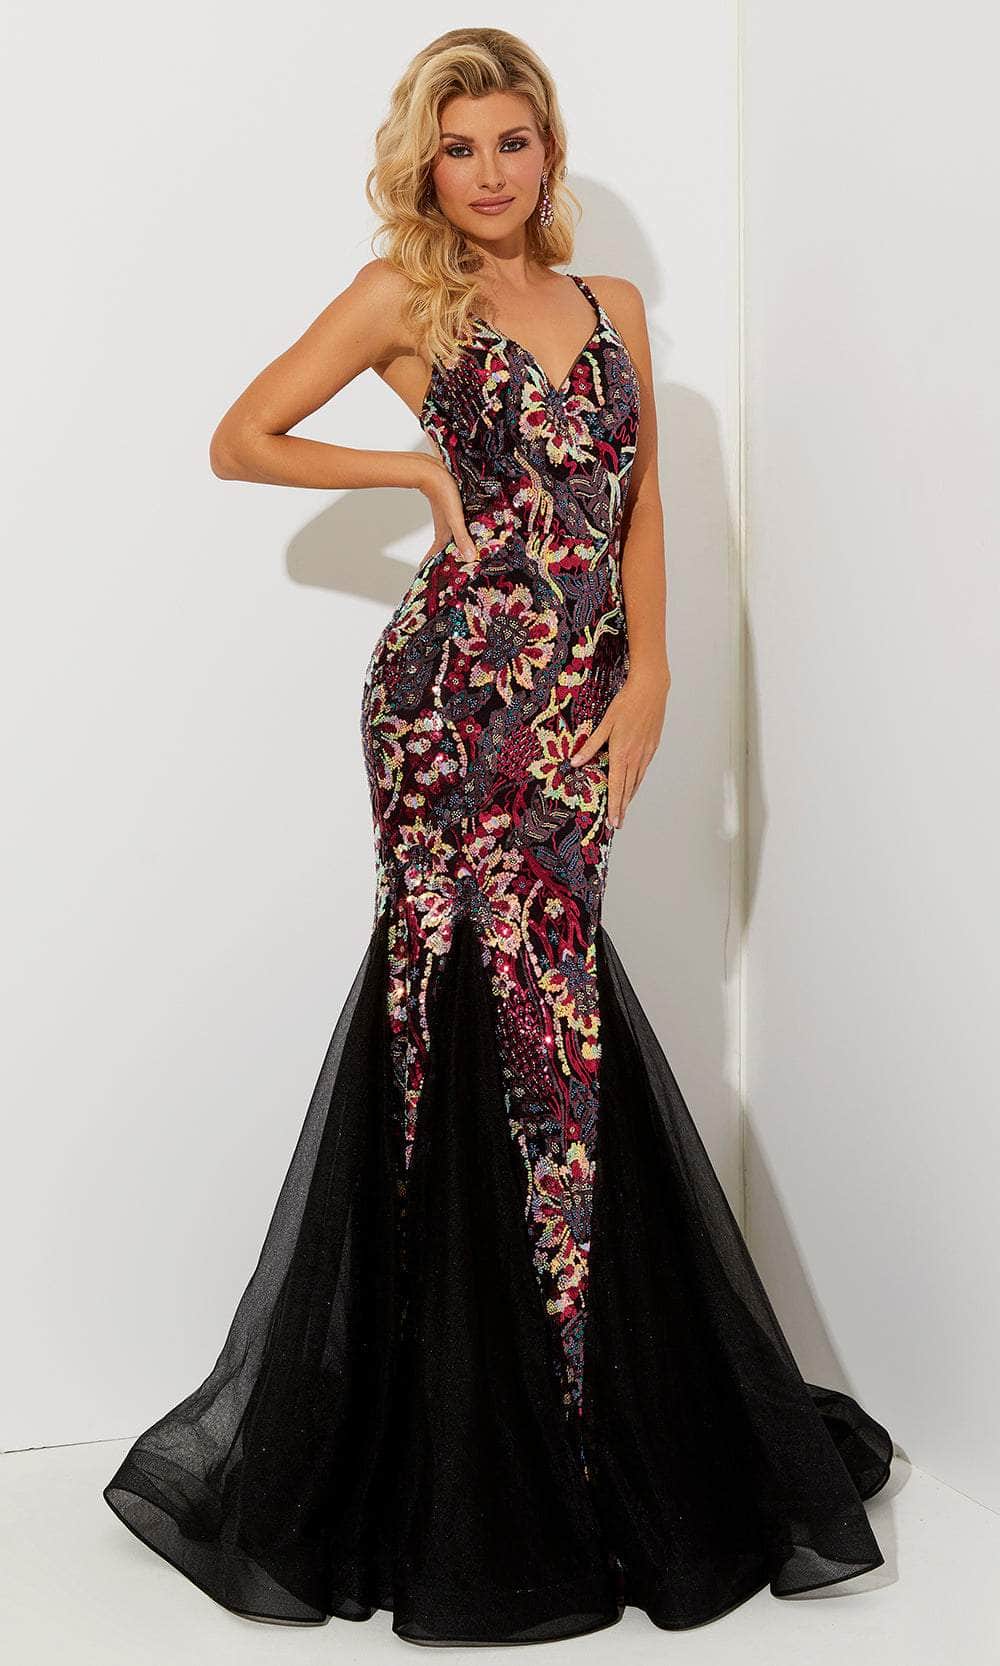 Image of Jasz Couture 7515 - Sequin Strappy Back Prom Dress